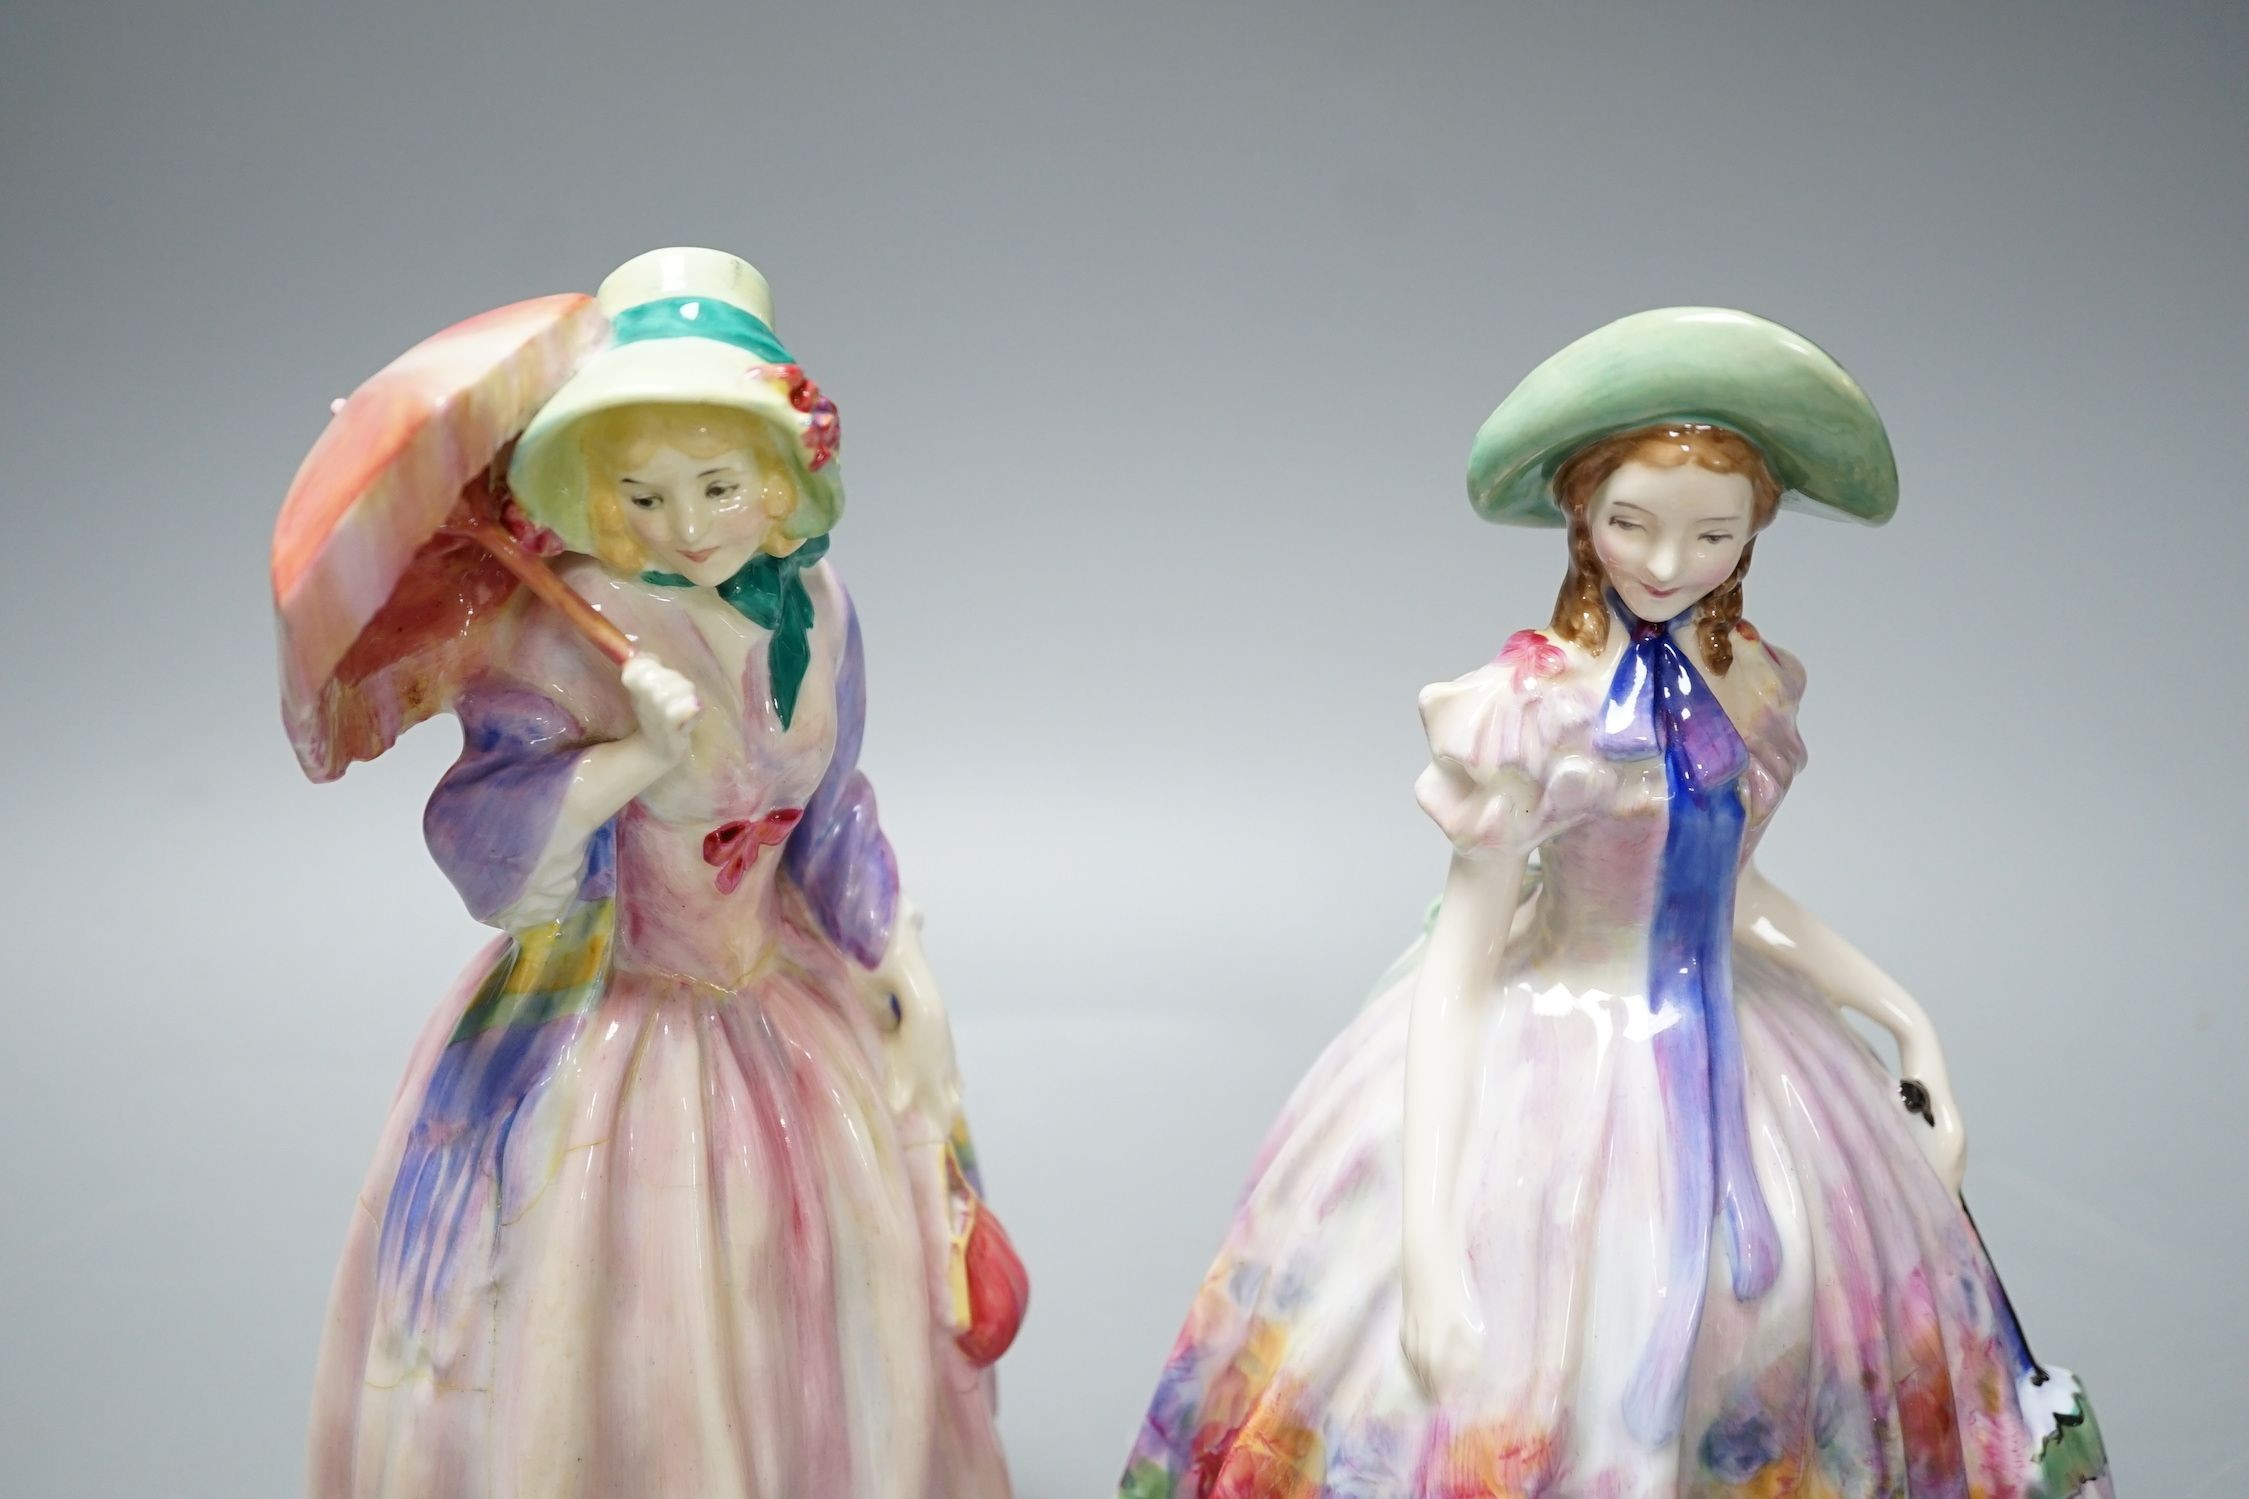 A Royal Doulton figurine: Reg No753474, Miss Demure and an Easter Day figurine: HN 2039, together with three Beswick Kingfisher wall plaques